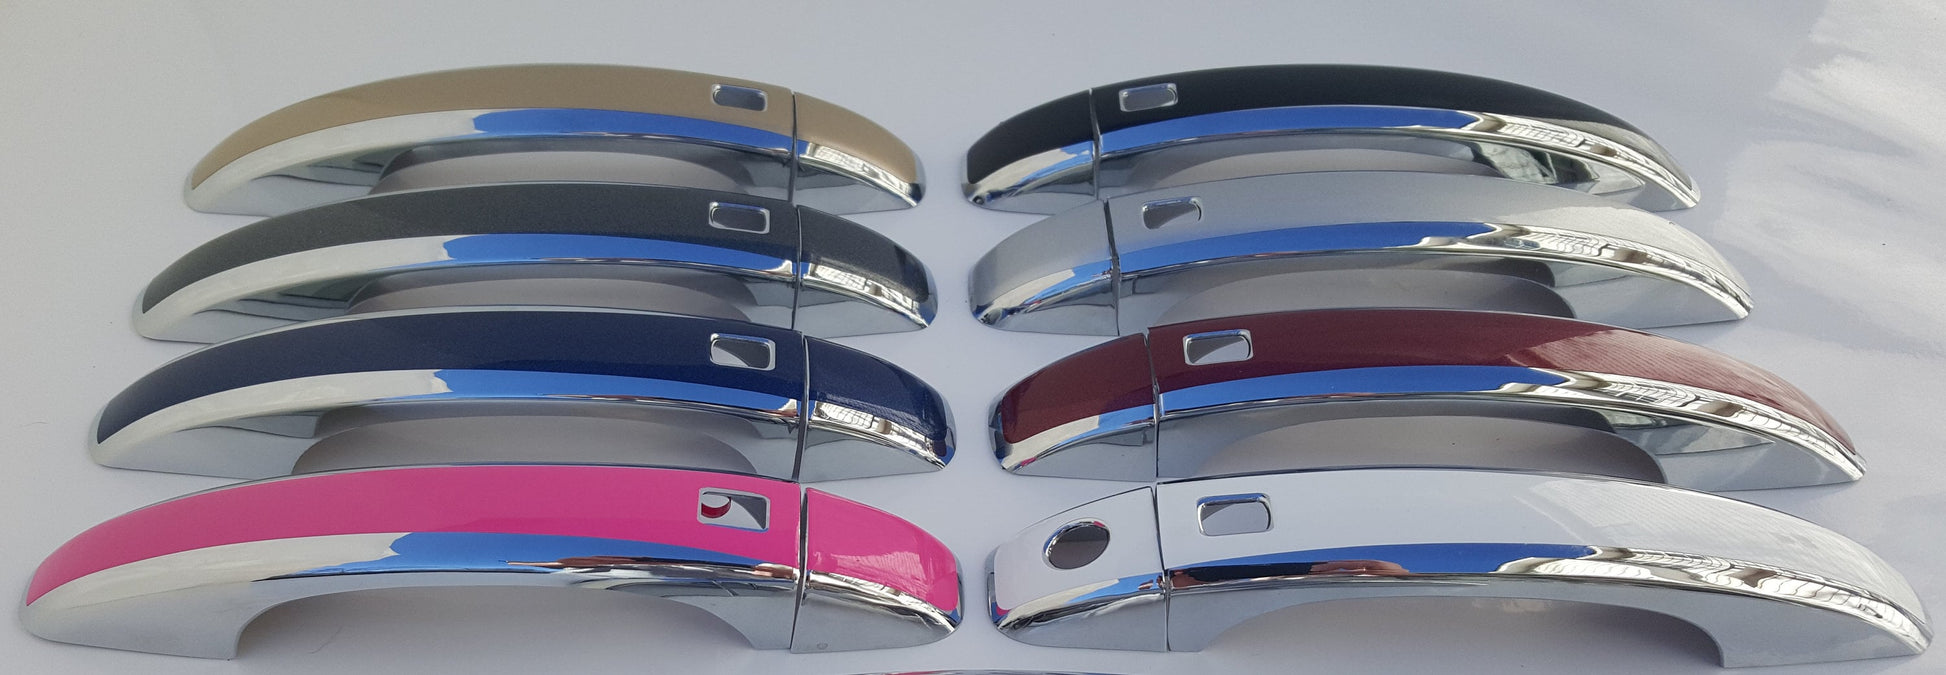 Full Set of Custom Chrome Door Handle Overlays / Covers For the 2009 – 2015 Audi Q5 -- You Choose the Middle Color Insert